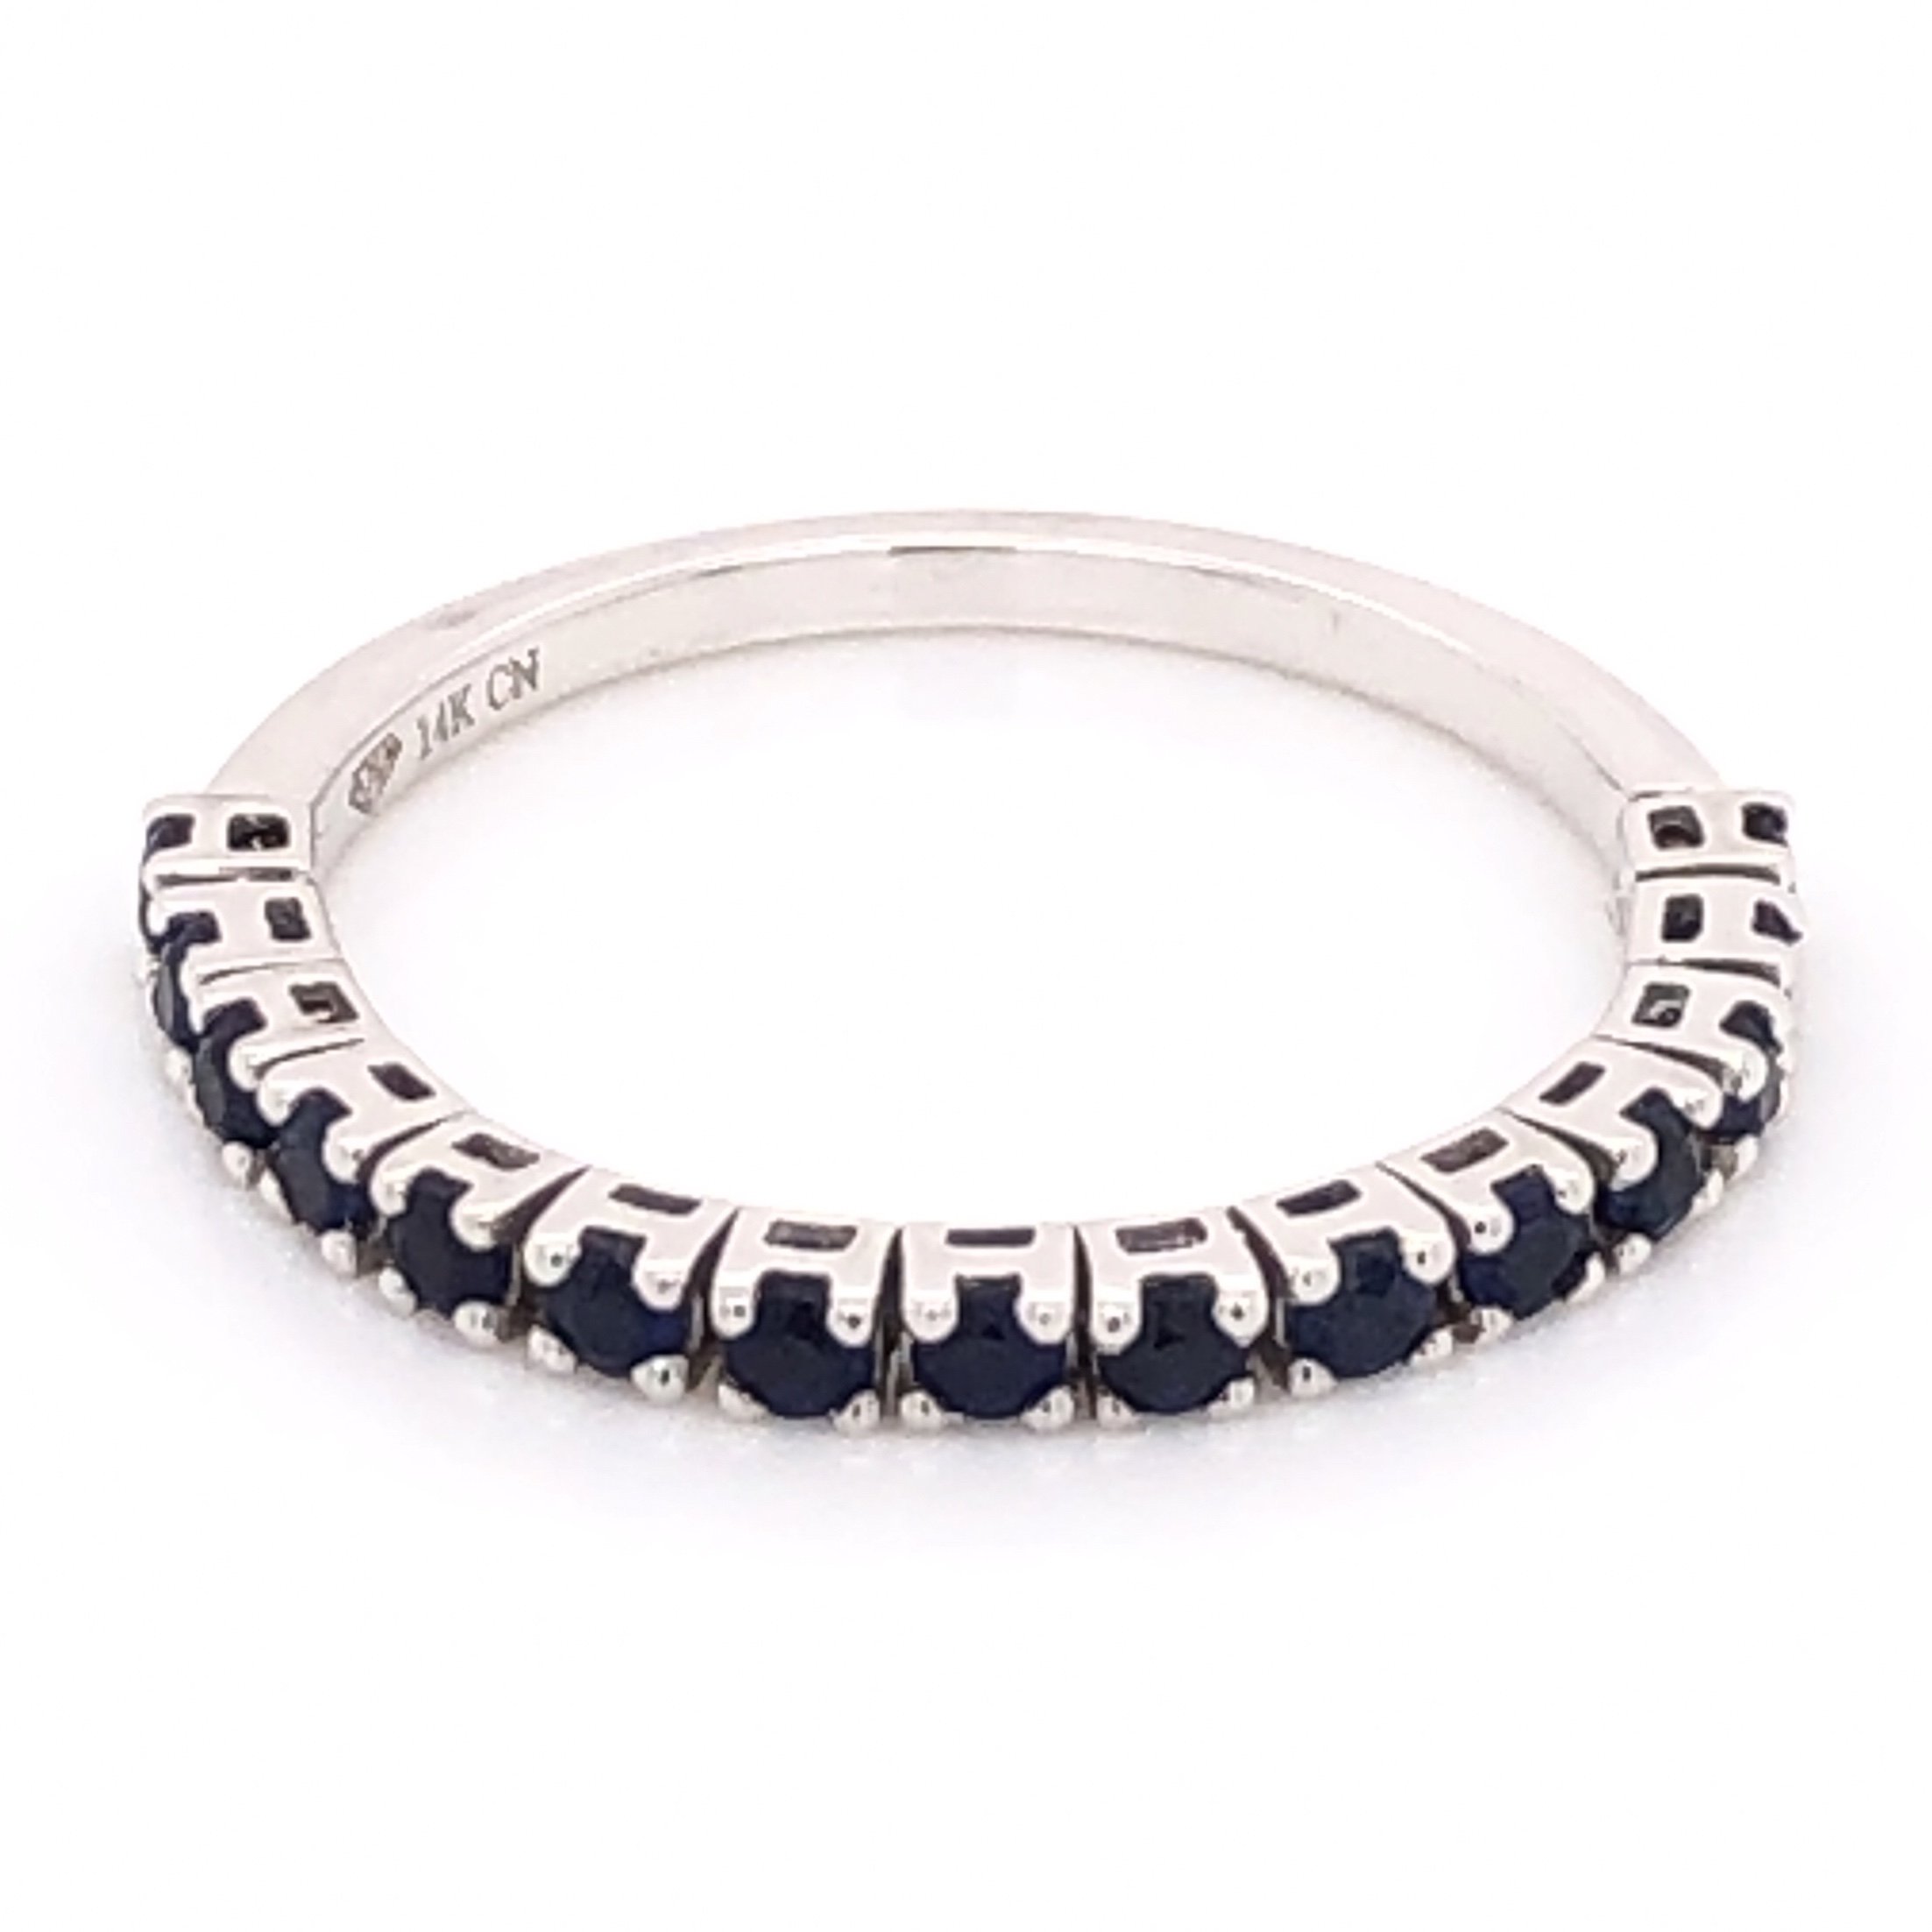 14K White Gold Flexible Band With .40tcw Sapphires 1.6g, s6.25